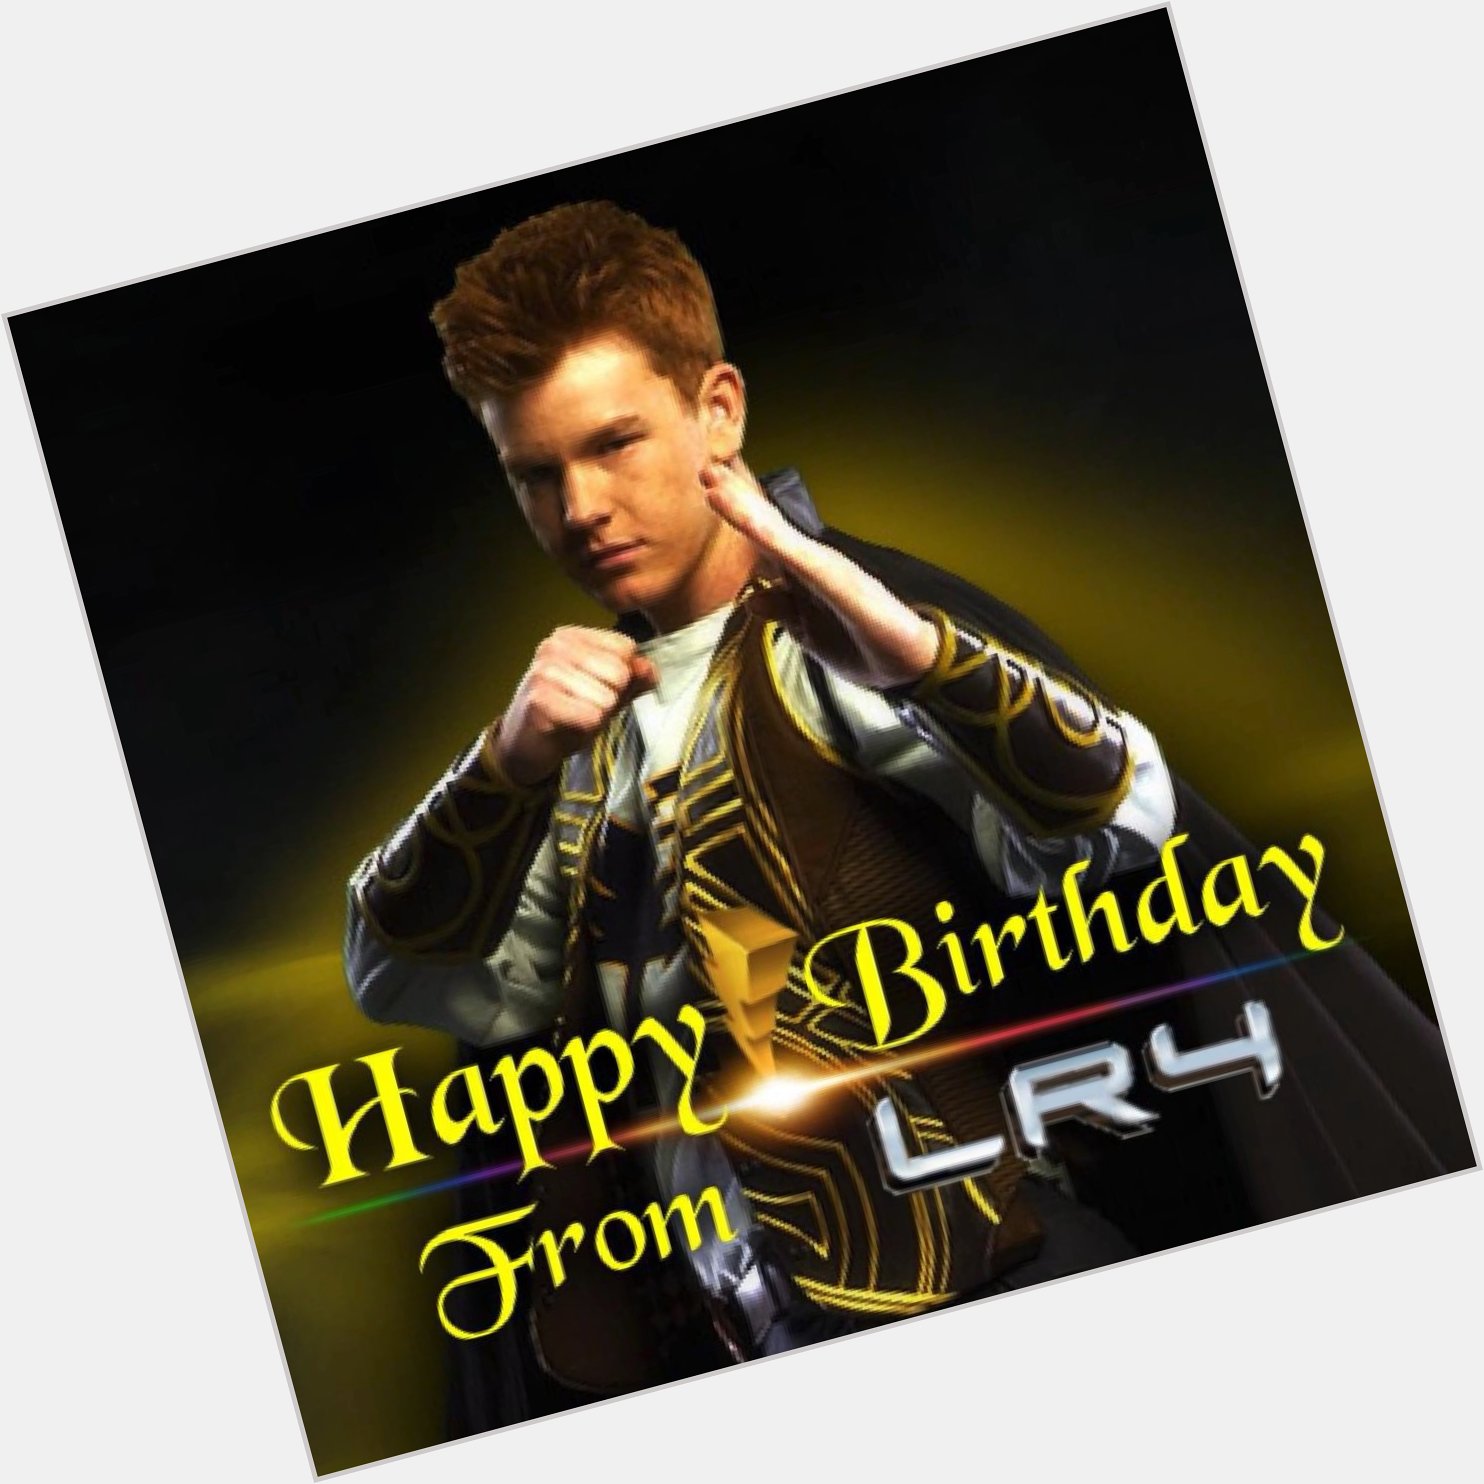 LR4 would like to wish Nic Sampson a Happy Birthday! 